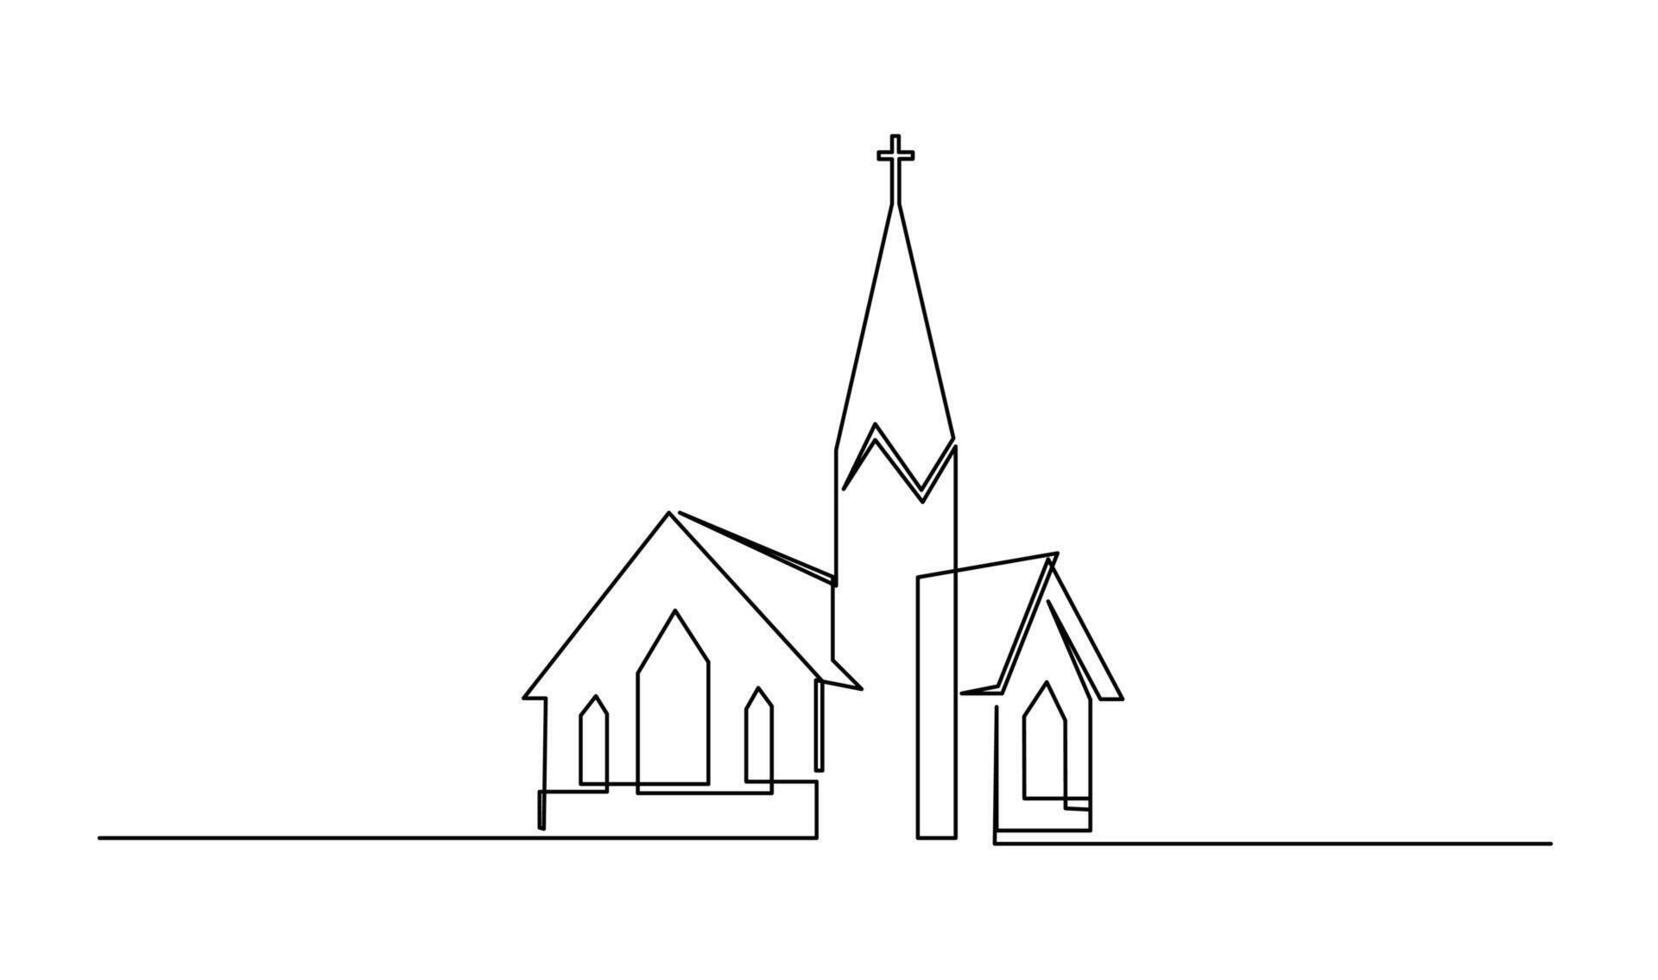 Church One line drawing isolated on white background vector